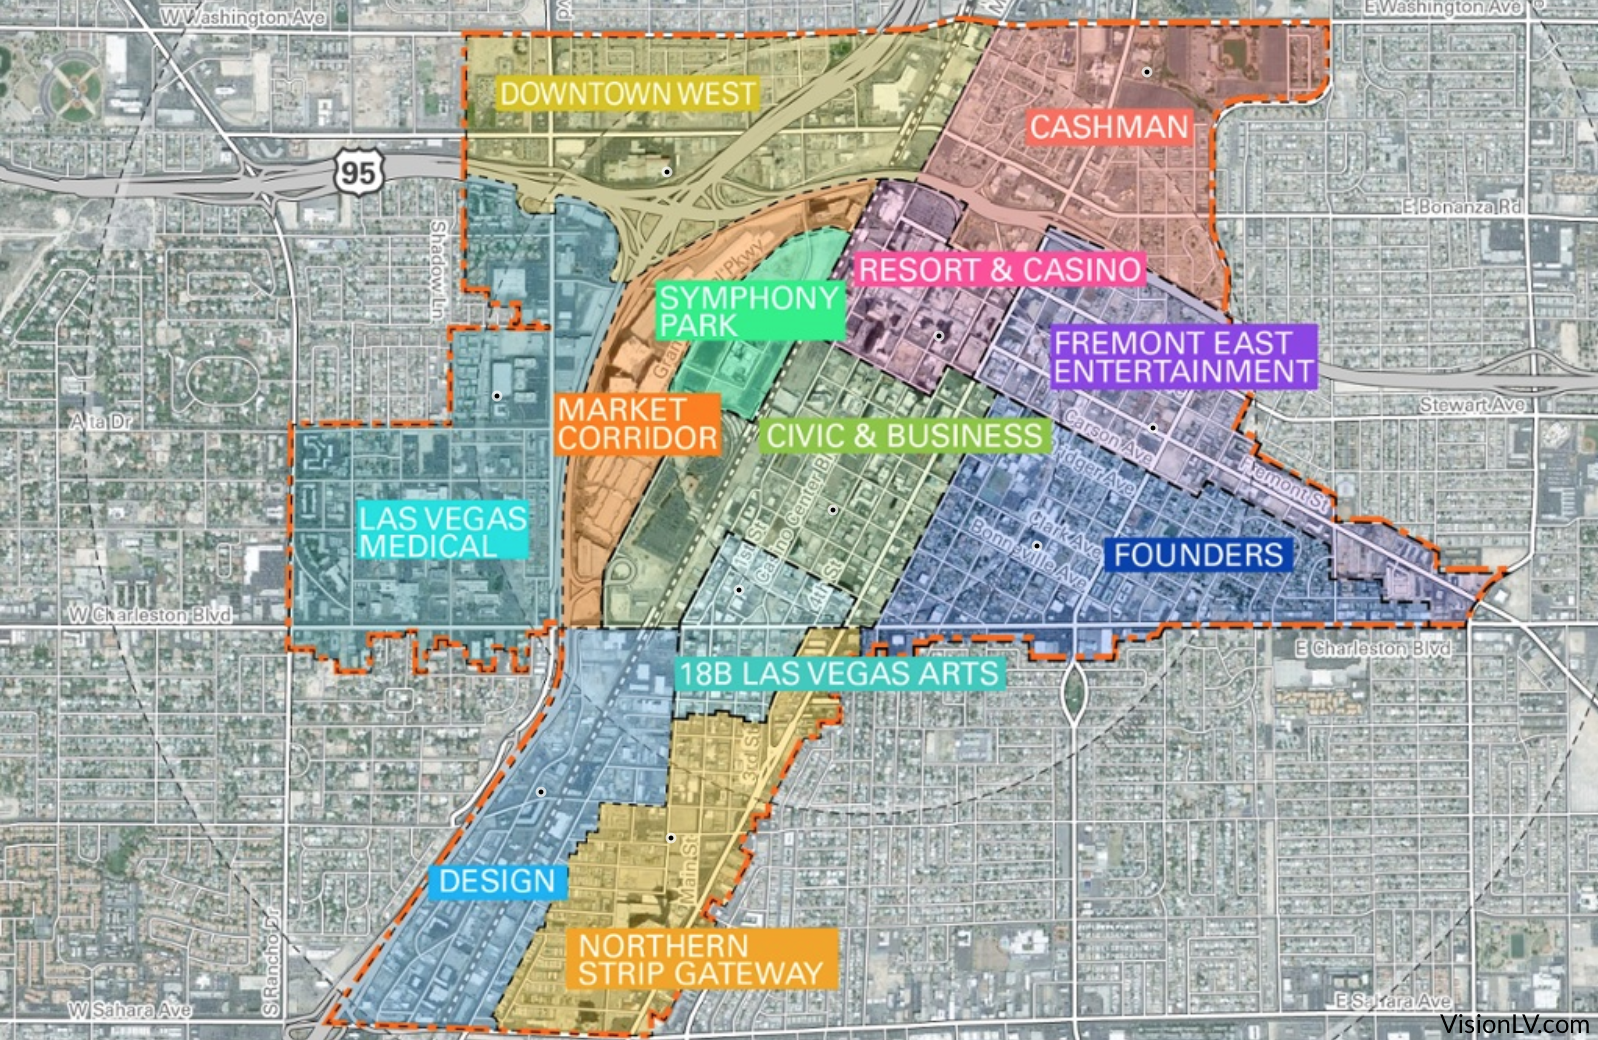 City of Las Vegas's Master Plan for Sustainability – Impact NV